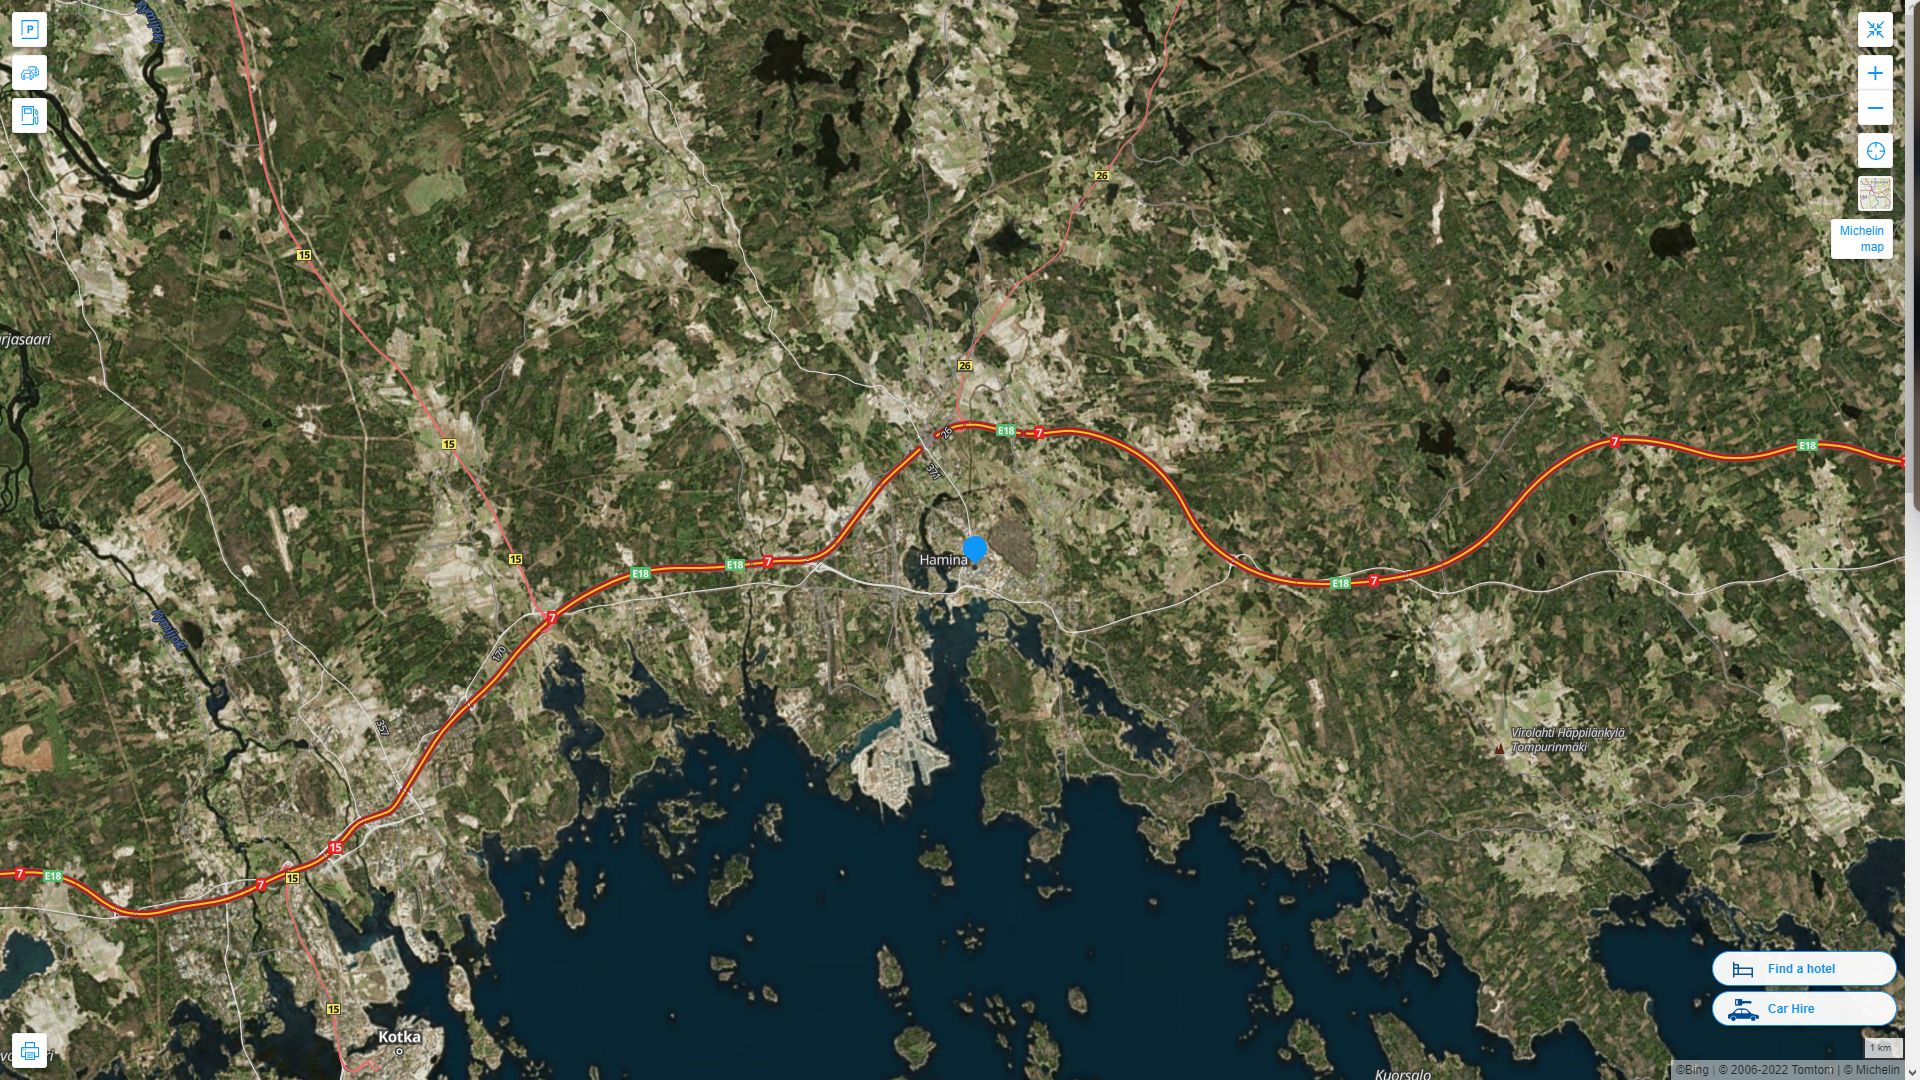 Hamina Highway and Road Map with Satellite View